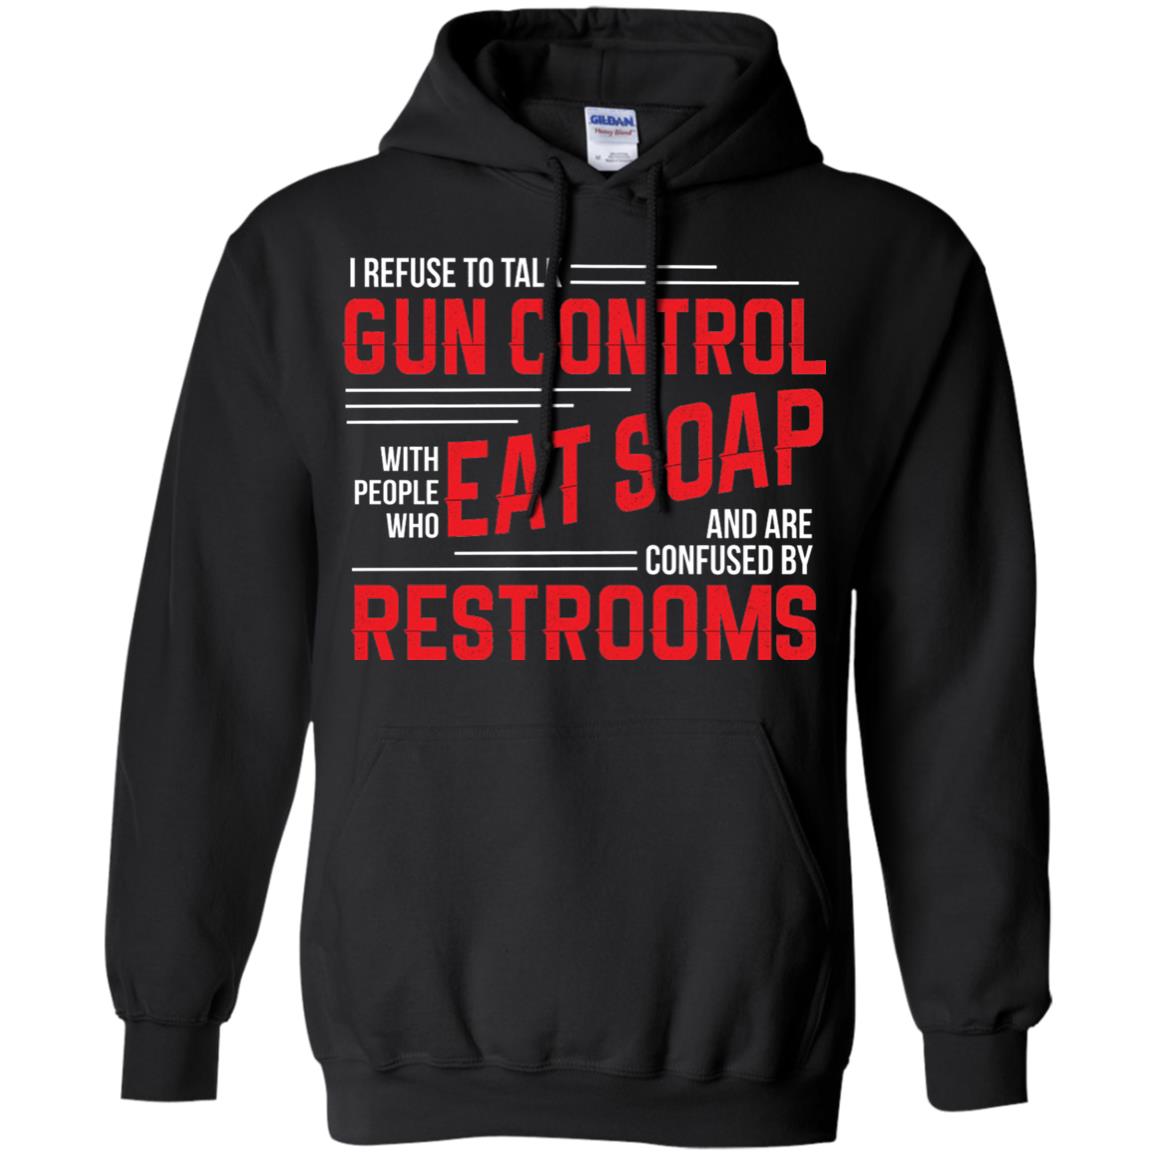 I Refuse To Talk Gun Control With People Who Eat Soap And Are Confused Restrooms